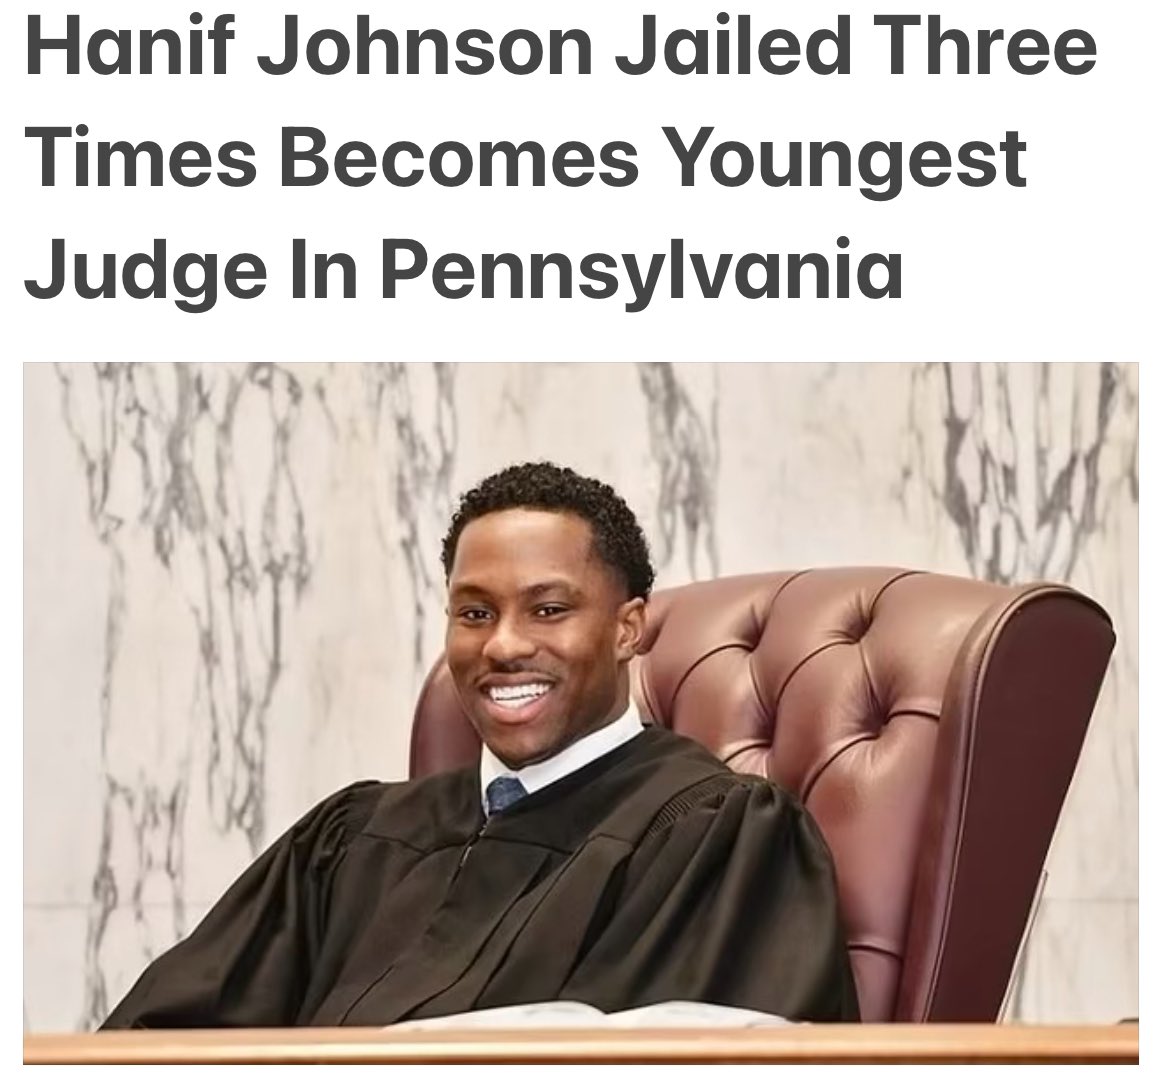 Pennsylvania man jailed three times become state's youngest judge at 27